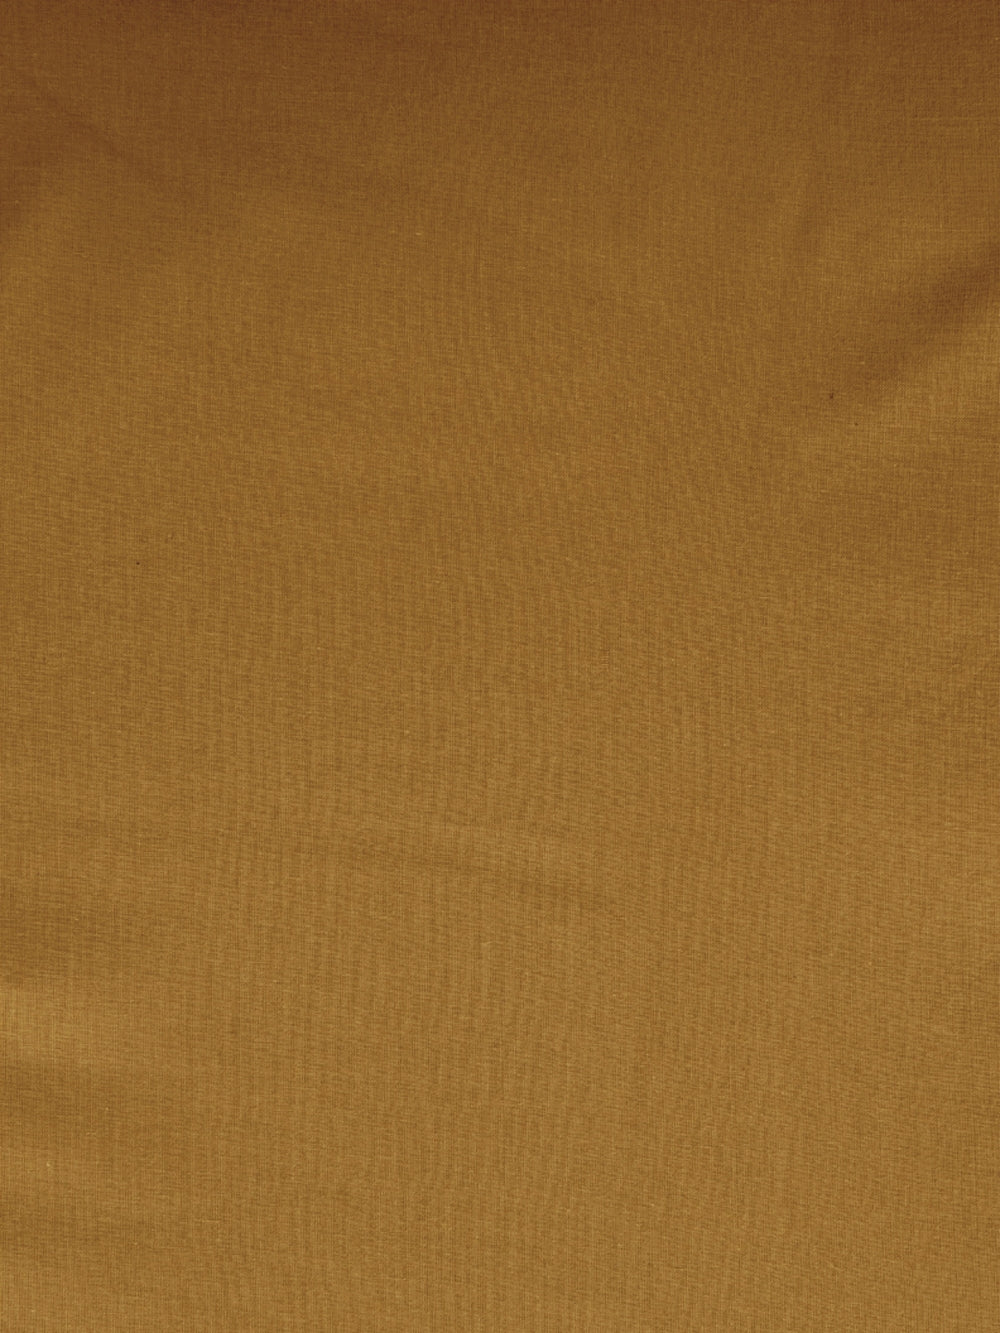 C-57 Camel Brown Shade Solid Dyed Cotton Cambric Fabric